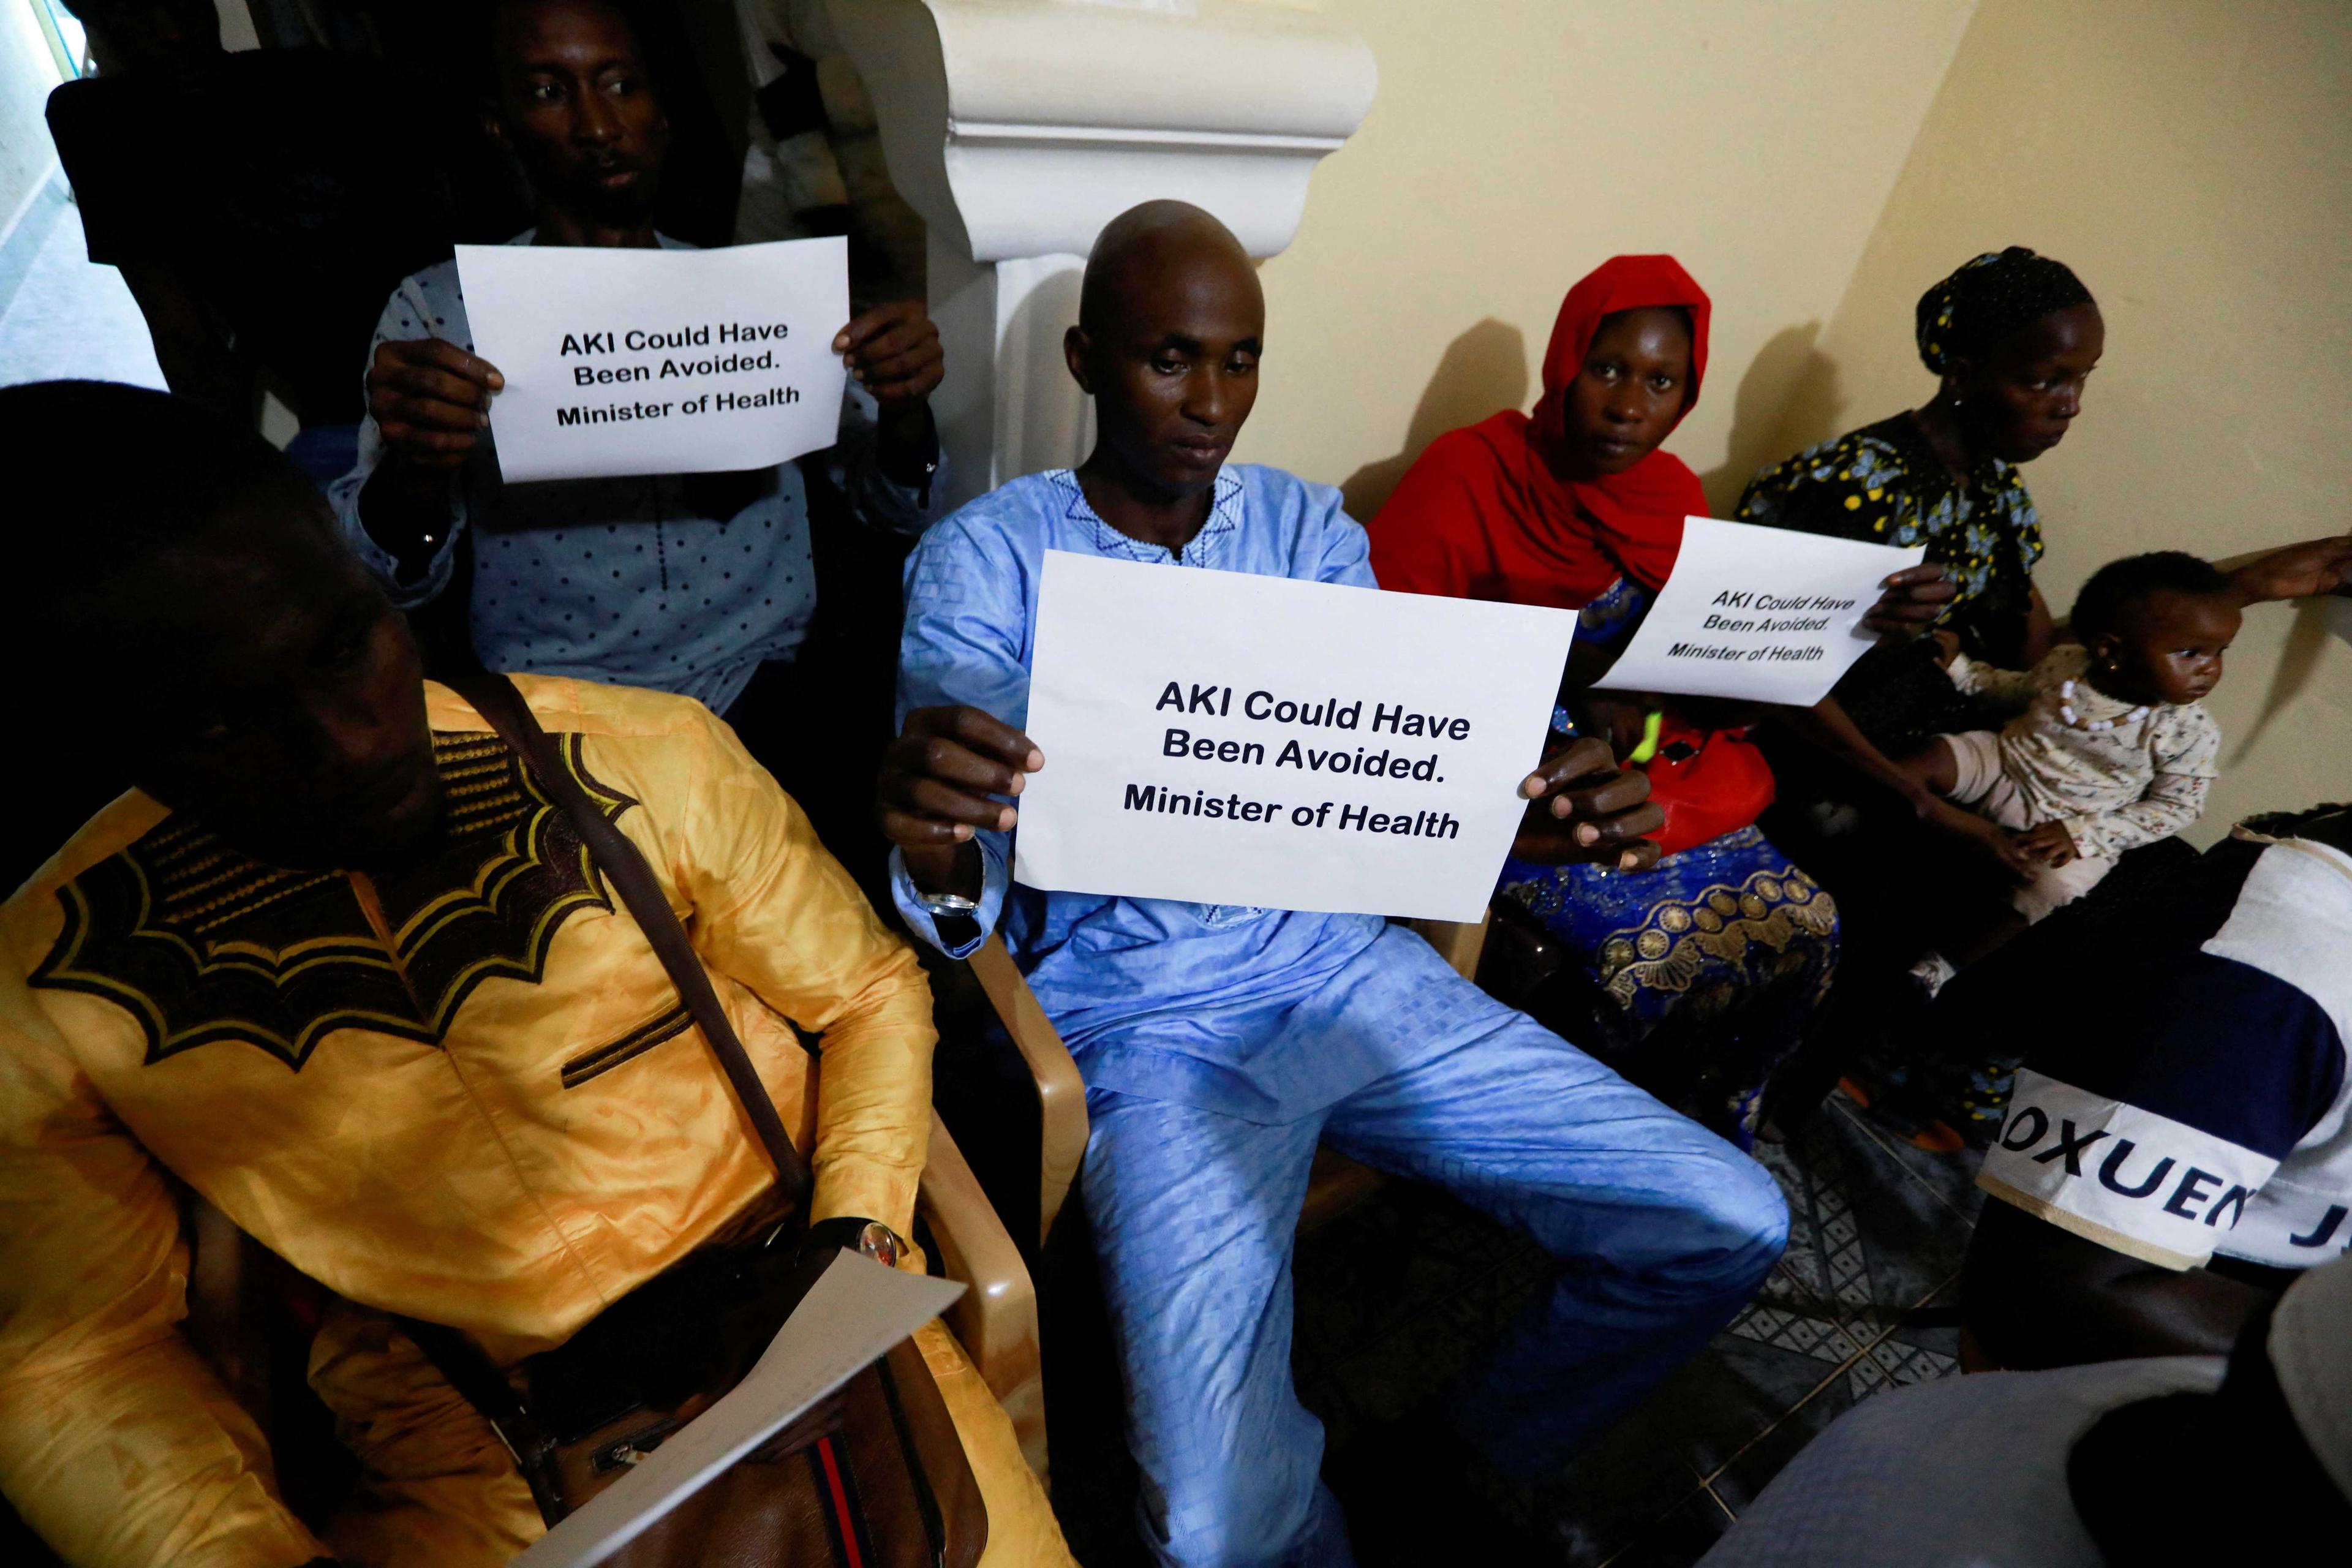 Individuals hold up signs during a news conference, calling for justice for the deaths of children linked to contaminated cough syrups, in Serekunda, Gambia, Nov 4, 2022. Photo: Reuters